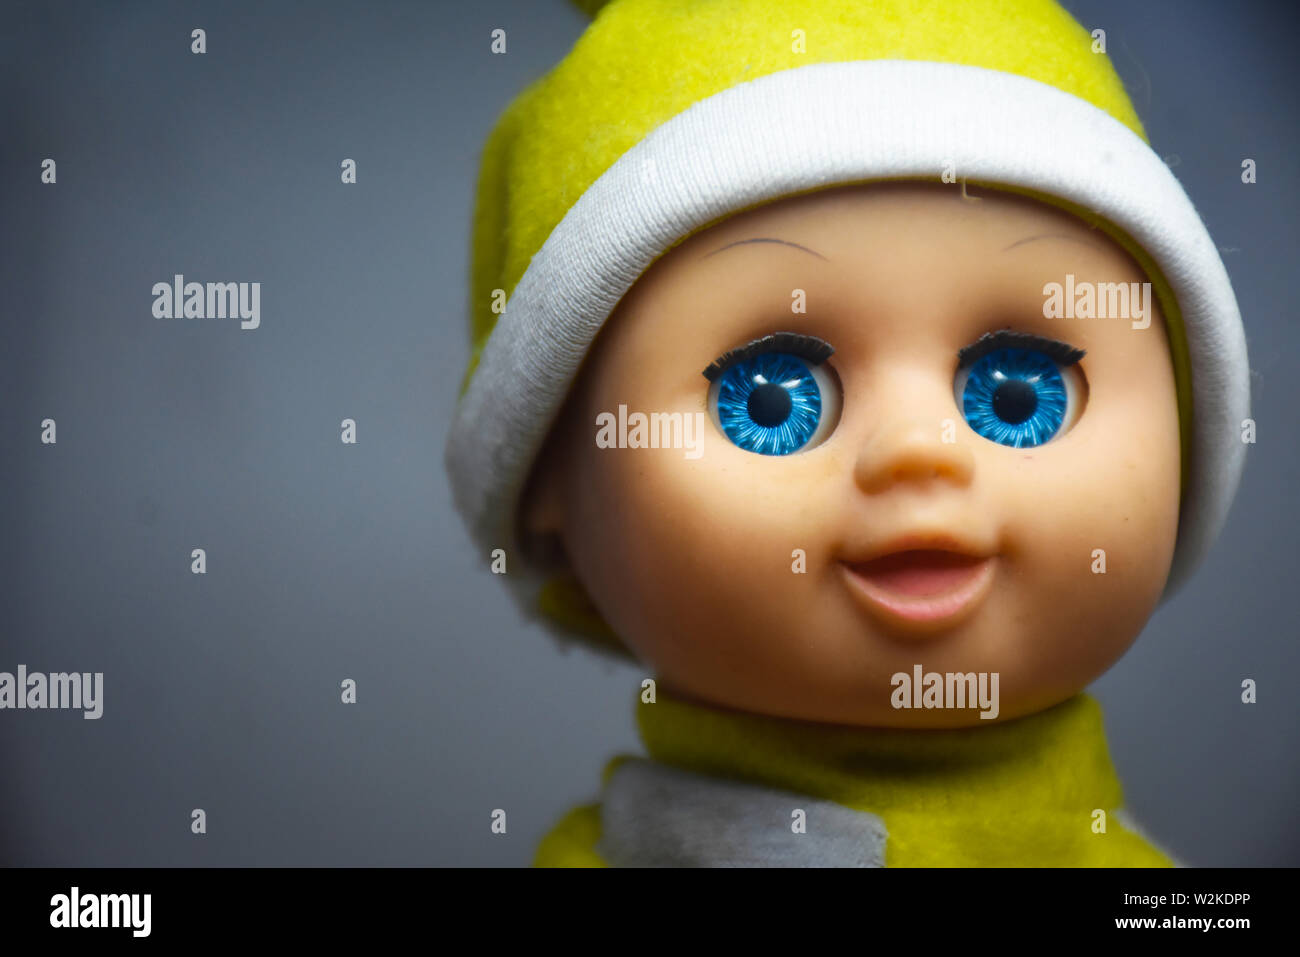 a portrait of a baby doll Stock Photo